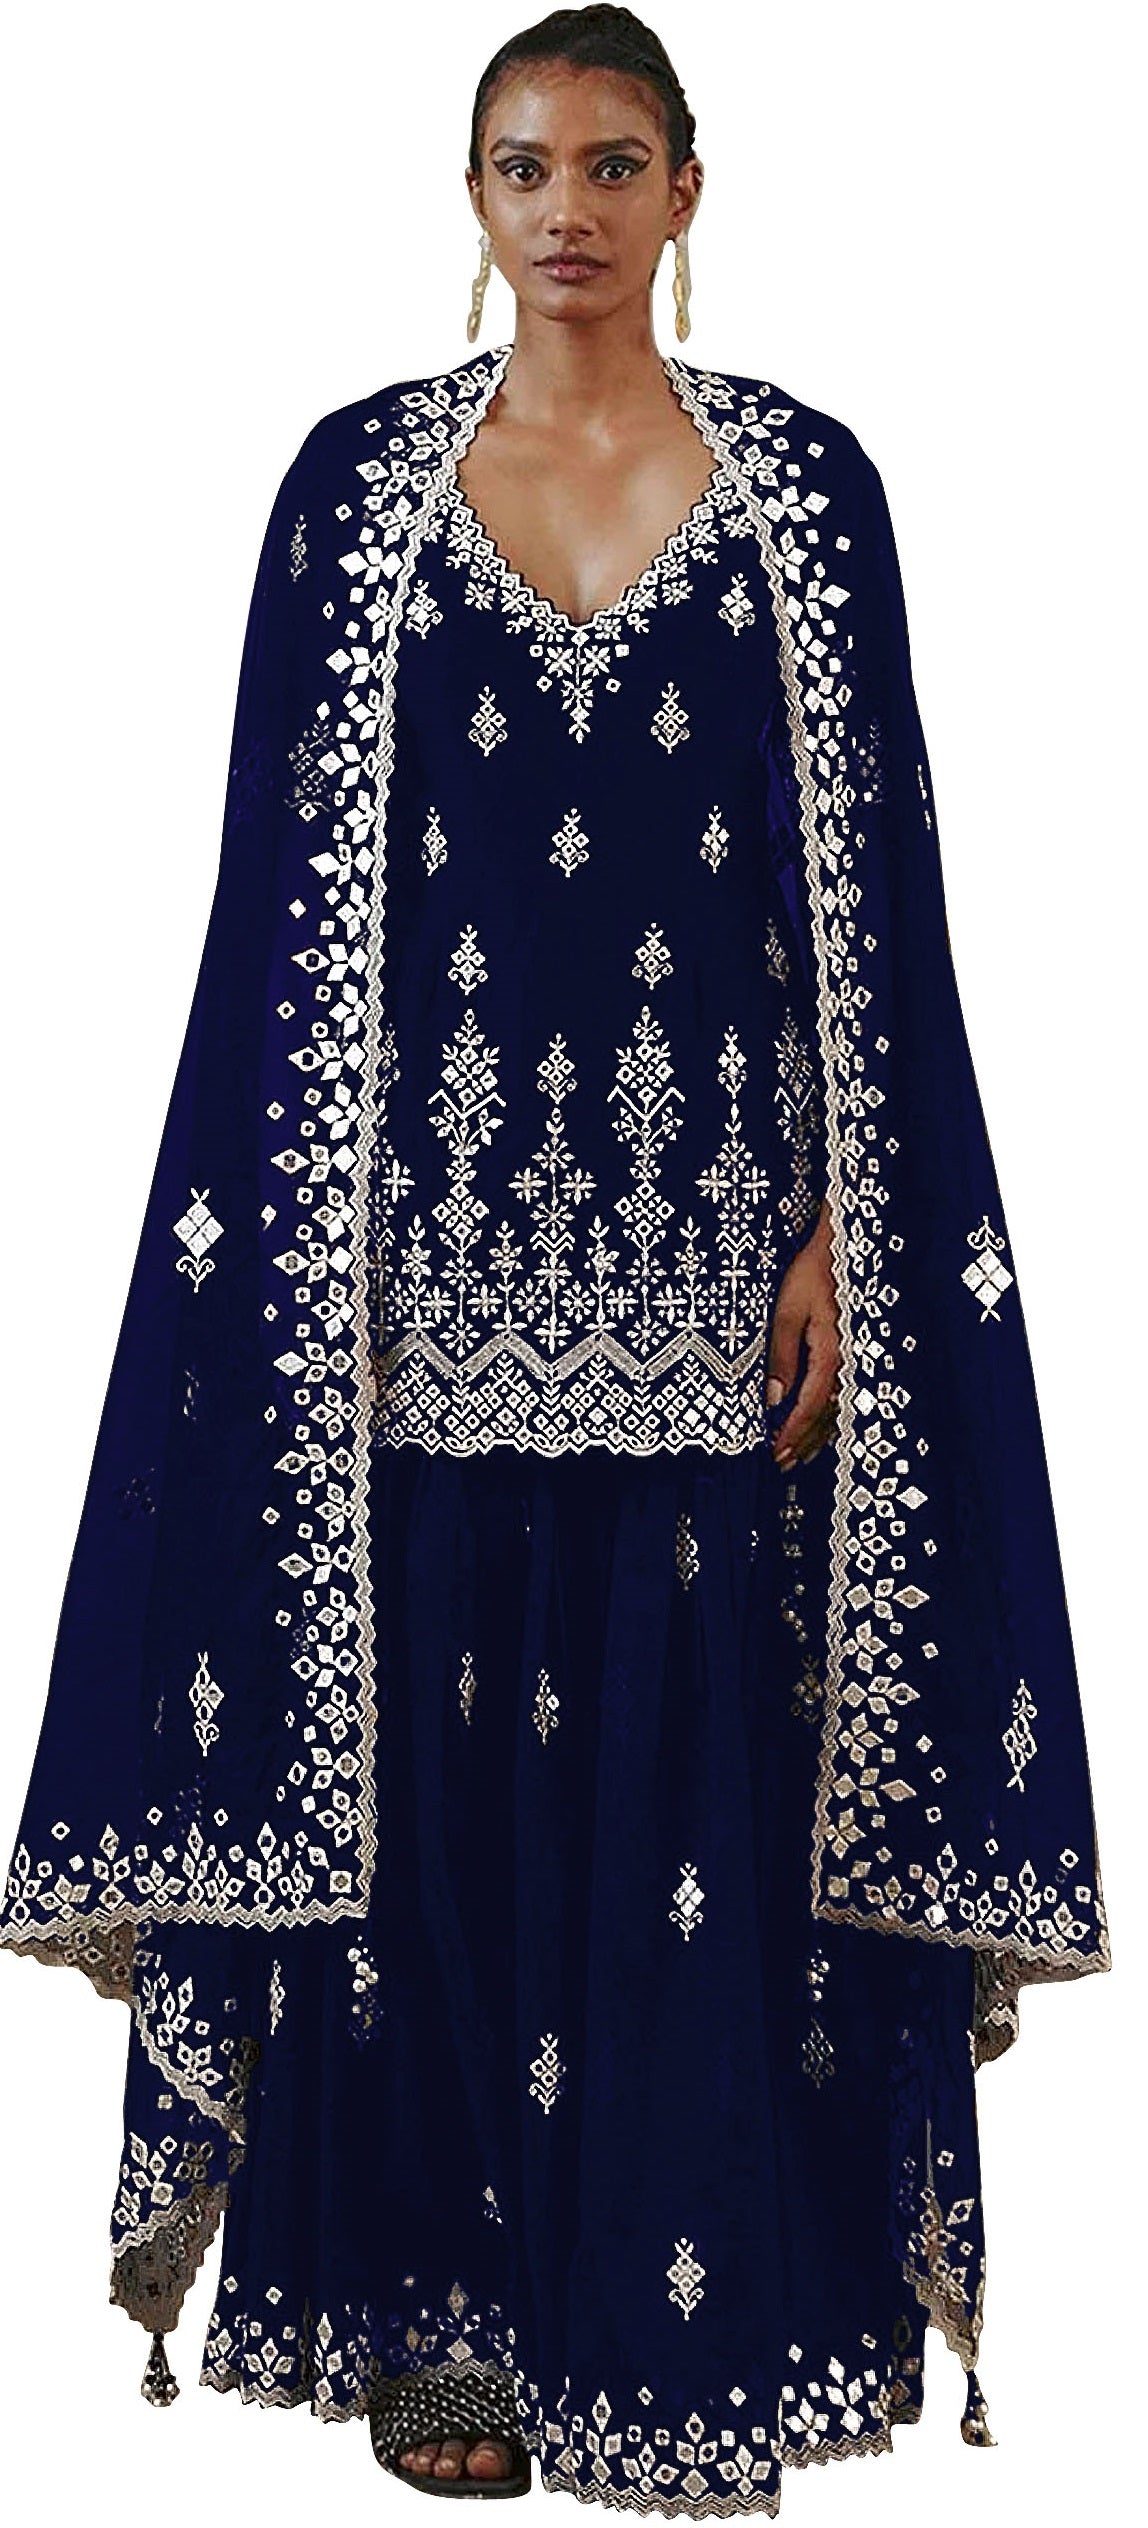 Nevy Blue Color Faux Georgette With Cotton Mirror Work Sharara Salwar suit